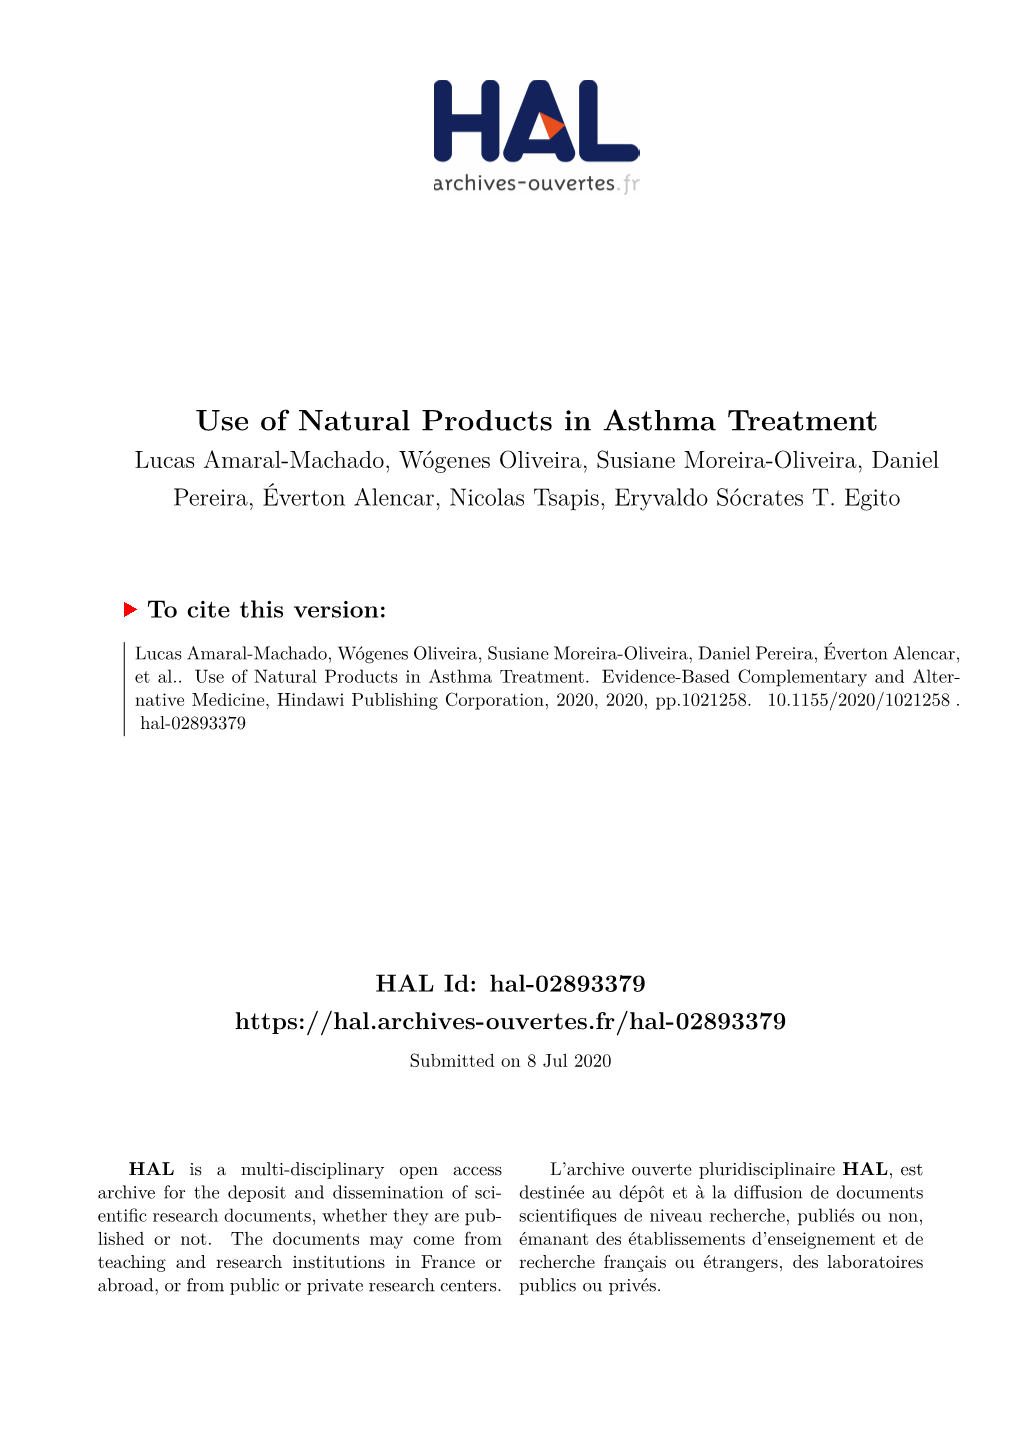 Use of Natural Products in Asthma Treatment